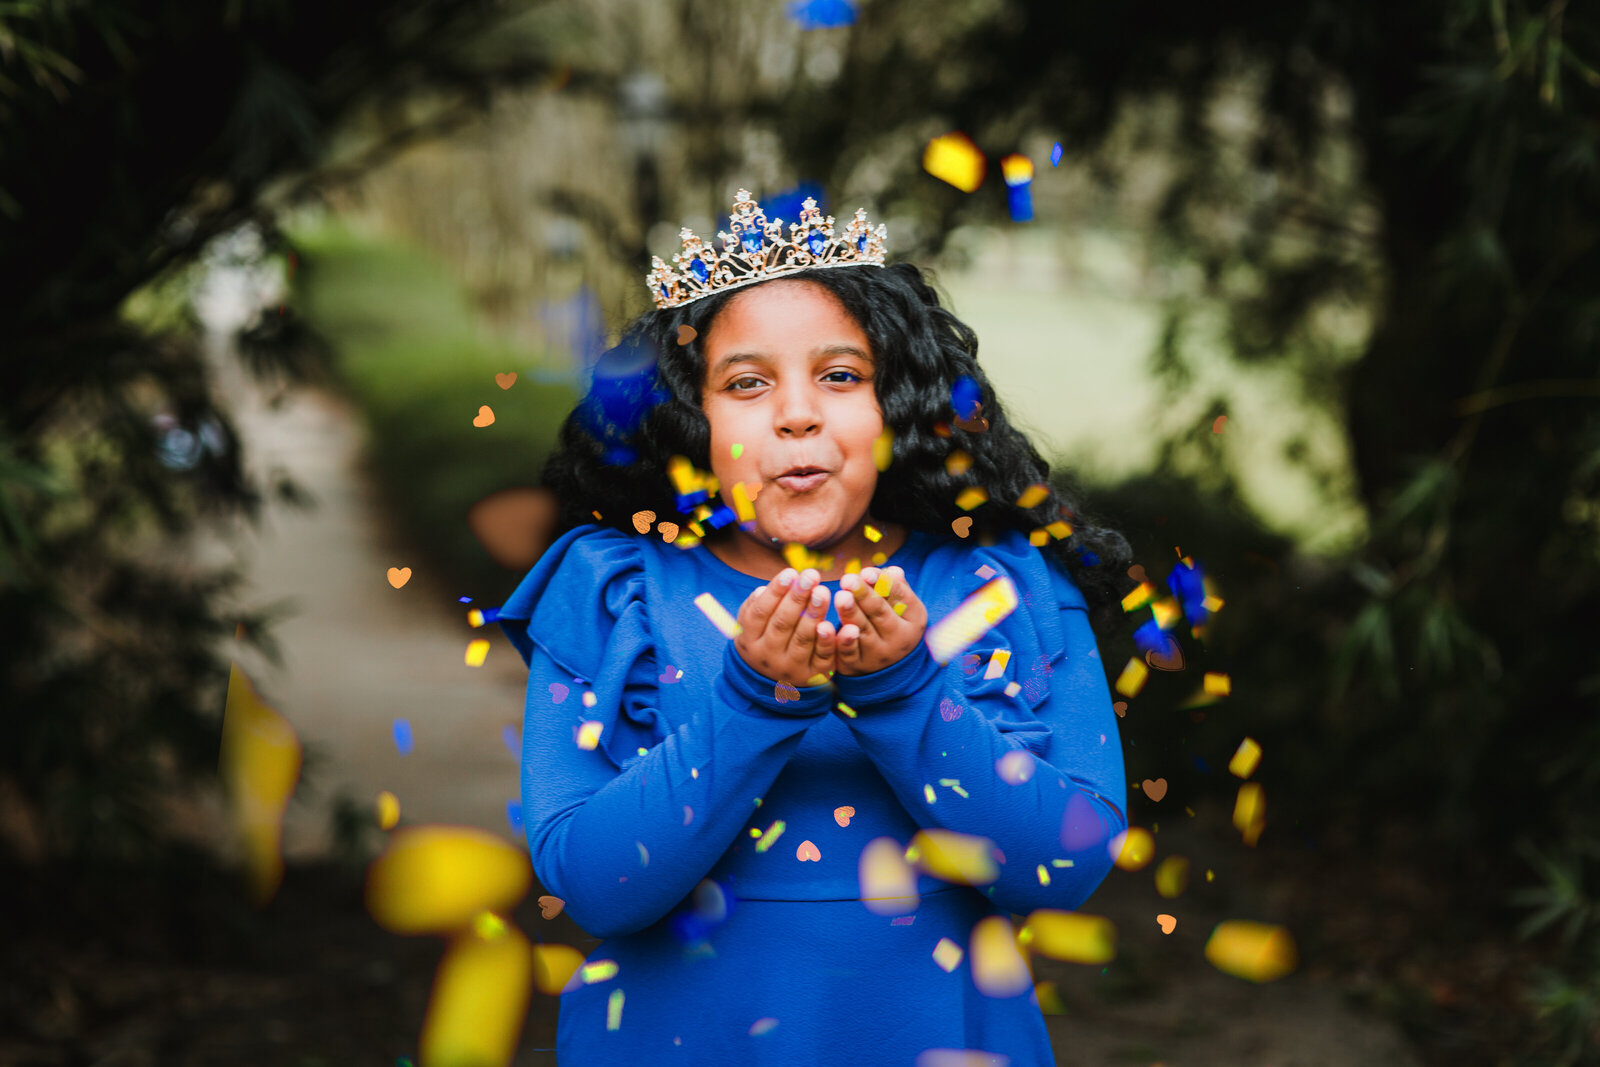 girl with crown blowing glitter